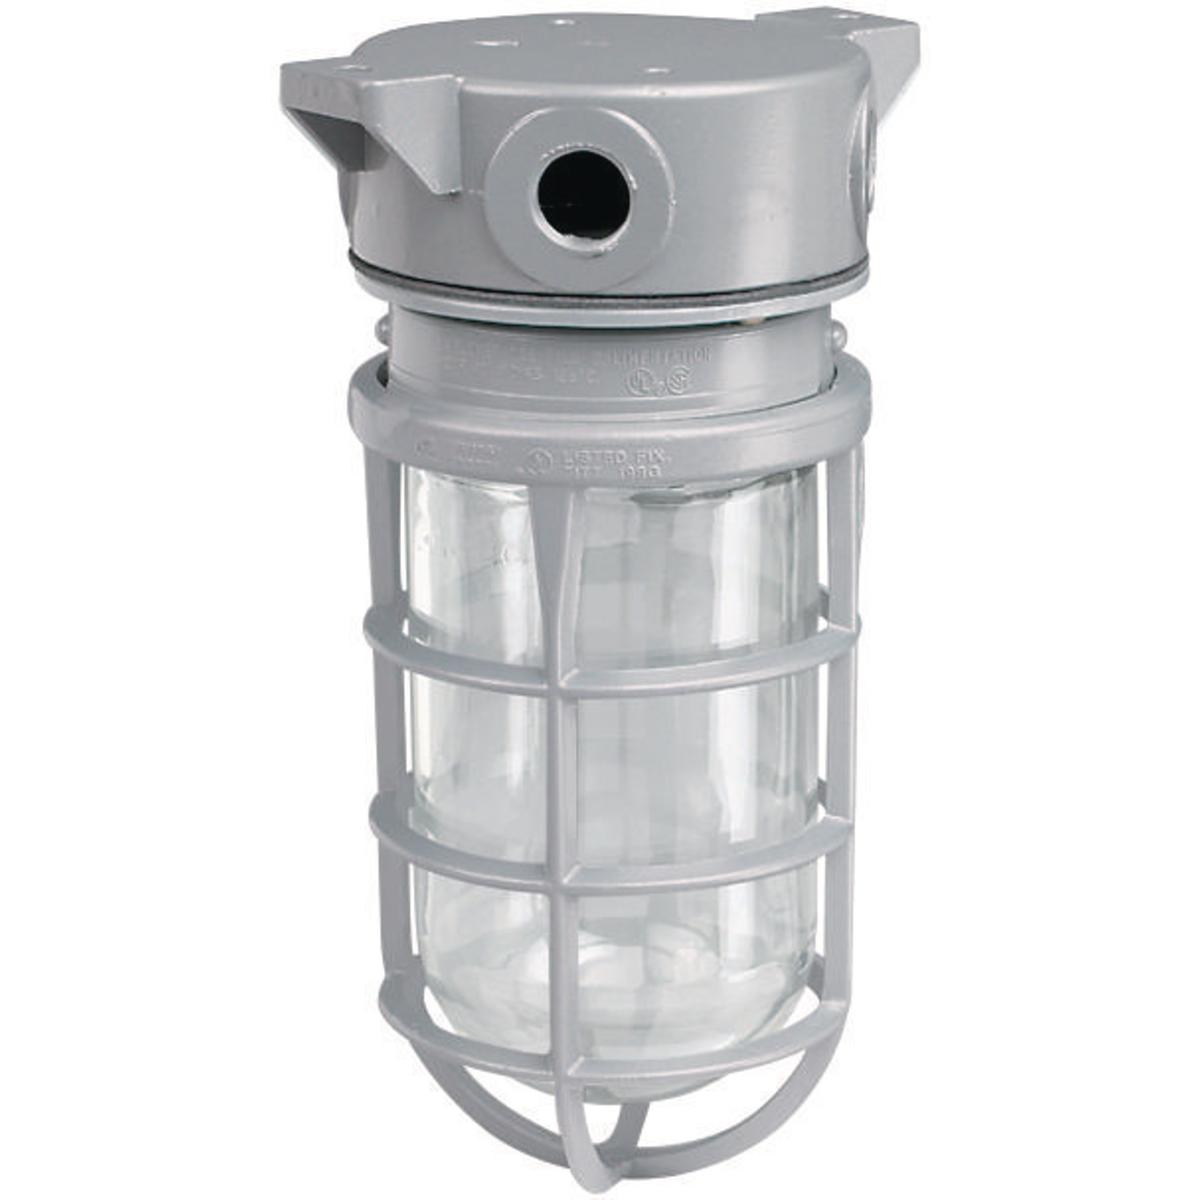 Hubbell VUXBGG-1-100 SU104 100W V Series Incandescent - Ceiling Fixture With Mounting Feet Using VBC Splice Box & VBA Adapter - 1/2" Hub with Guard - Unit Pack  ; Electrostatically applied epoxy/polyester finish ; Modular design ; Hubs are threaded for attachment to conduit ; Set s